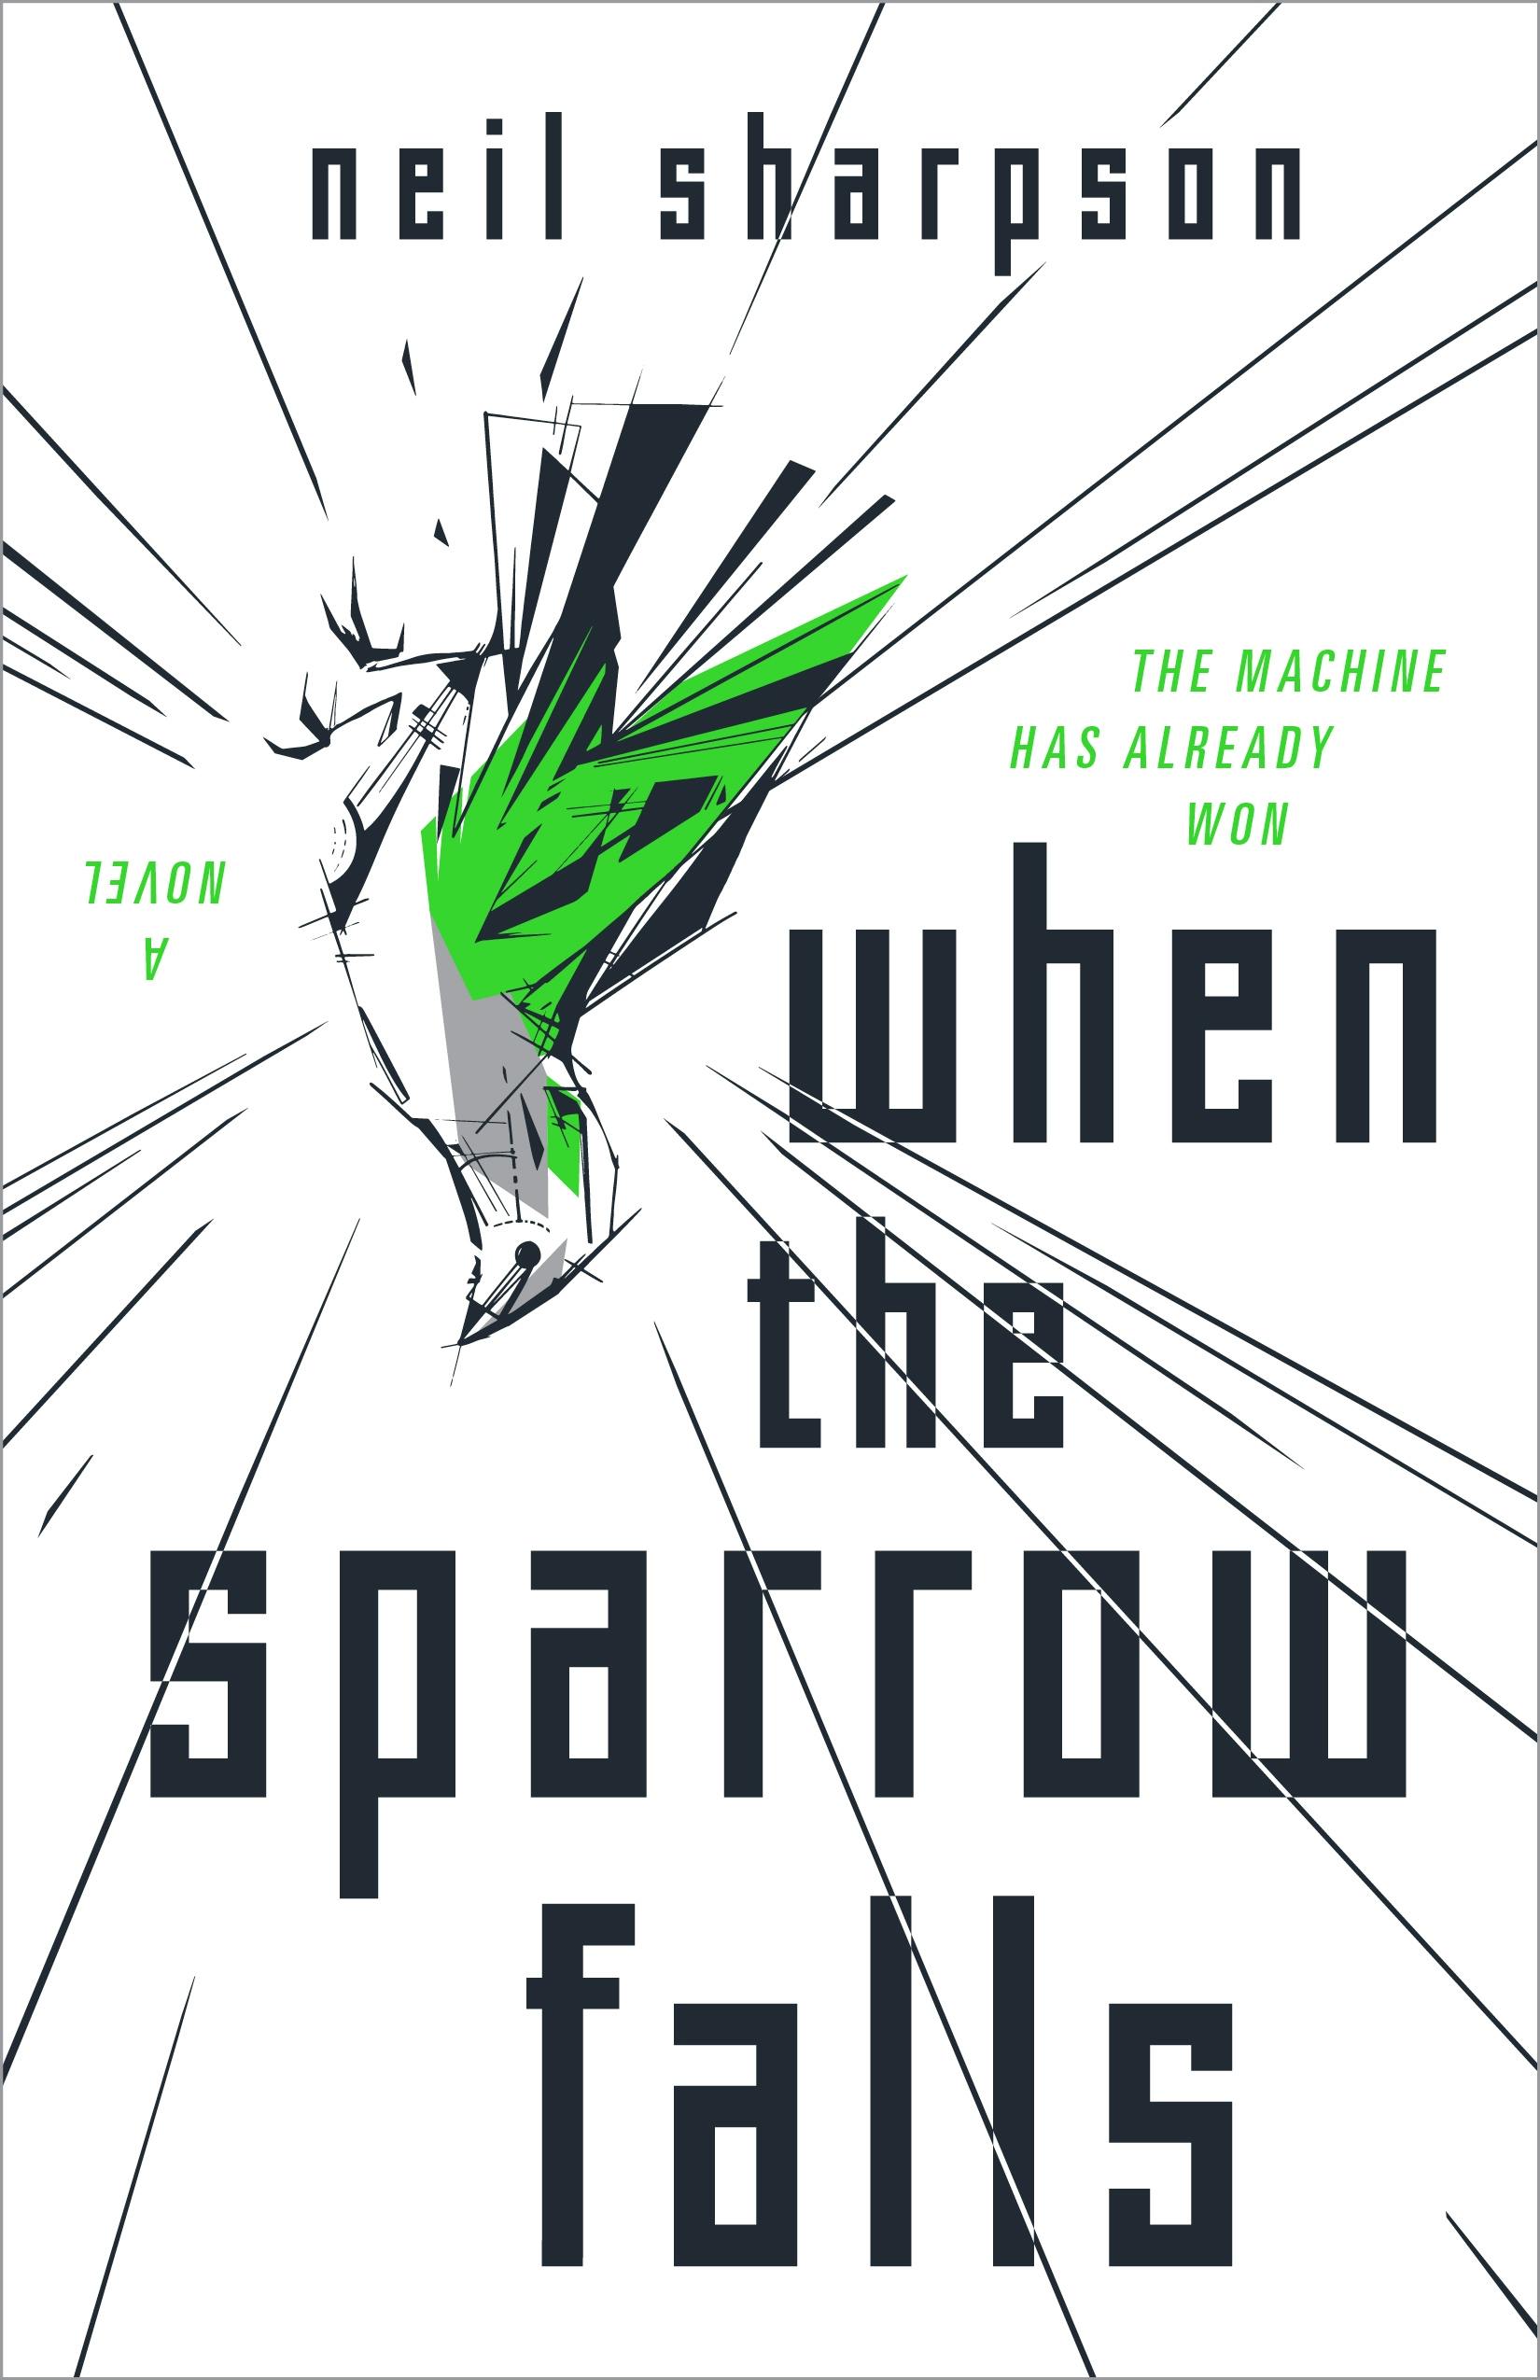 Cover for the book titled as: When the Sparrow Falls